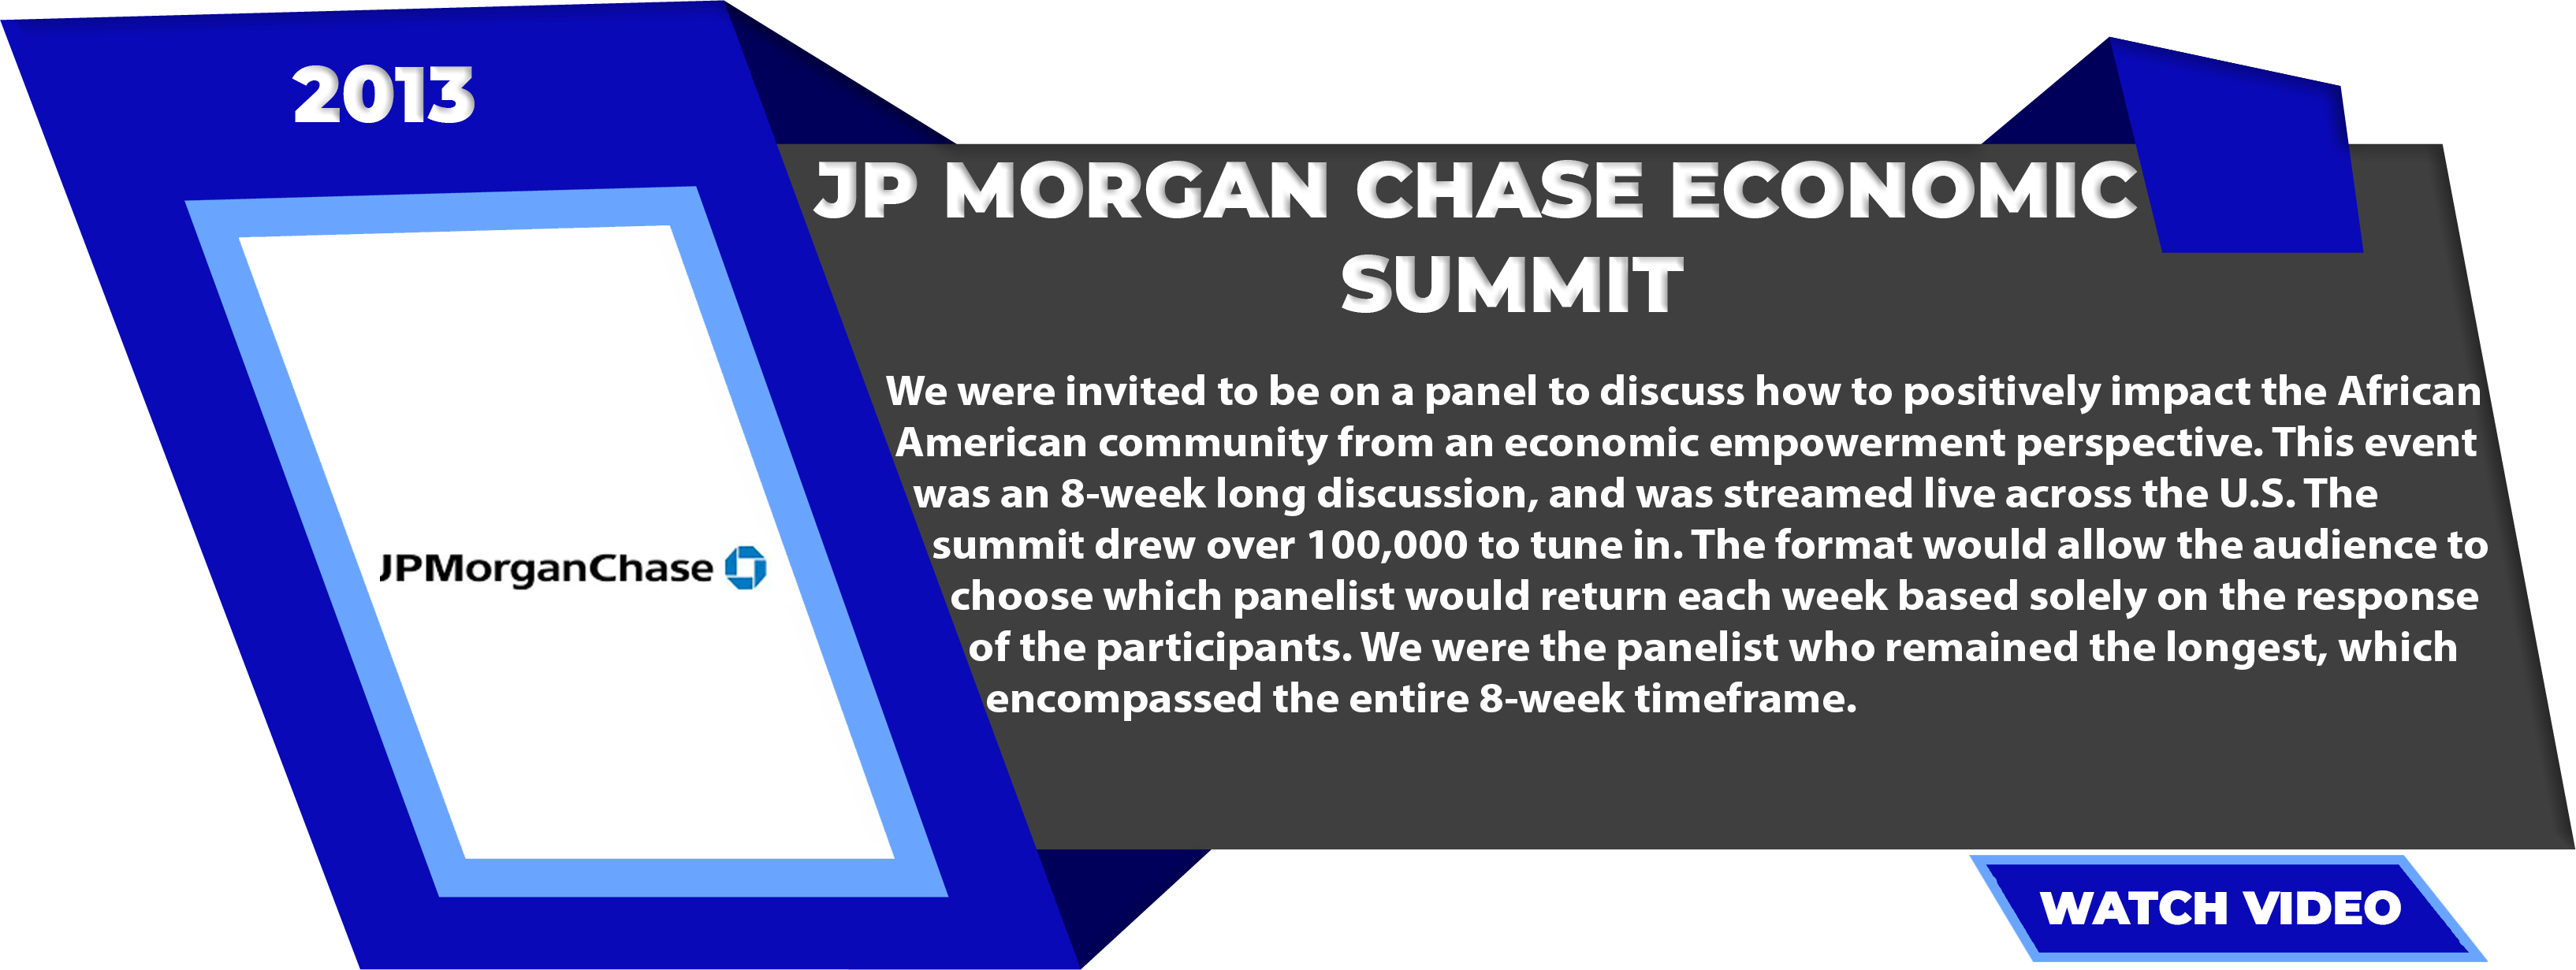 JP-Morgan-Chase-Economic-Summit-2013-Recovered-1